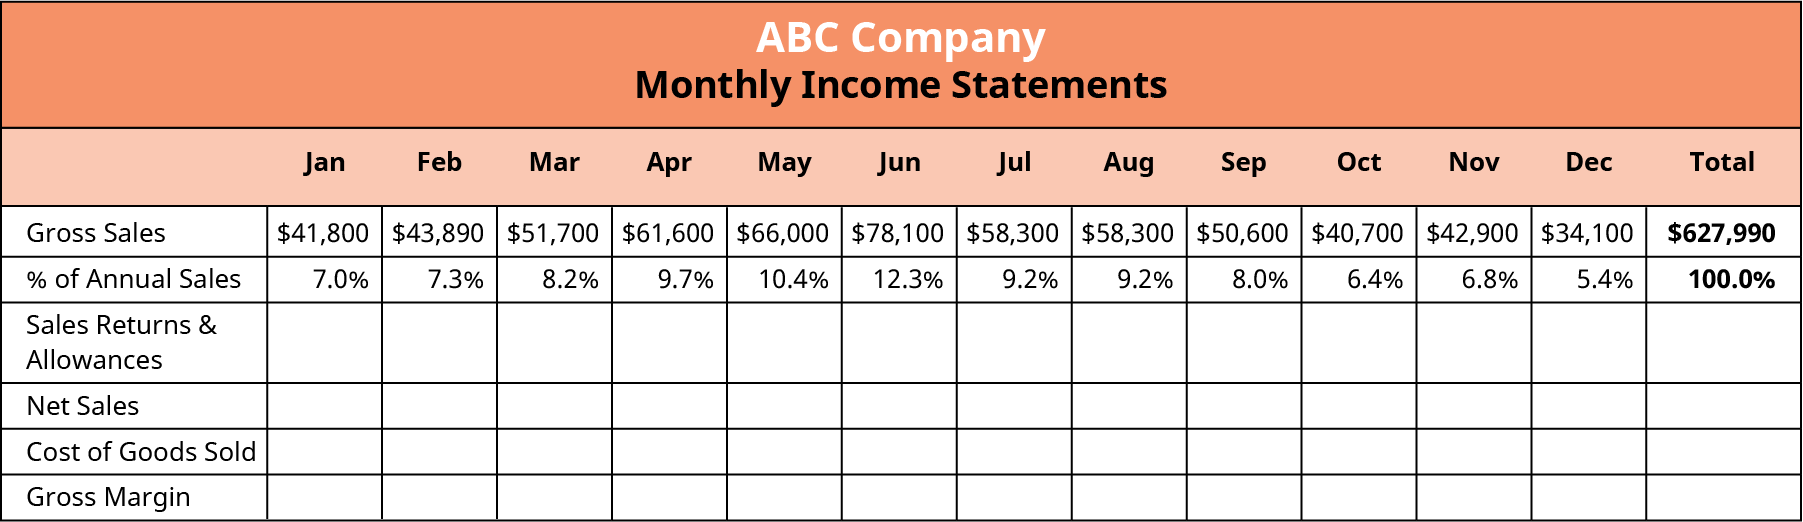 The monthly income statement of ABC company shows gross sales by month: January - $41,800; February - $43,890; March - $51,700; April - $61,600; May - $66,000; June - $78,100; July - $58,300; August - $58,300; September - $50,600; October - $40,700; November - $42,900; and December - $34,100.  The total sales for the year is $627,990. It also shows the % of annual sales by month: January – 7%; February – 7.3%; March – 8.2%; April – 9.7%; May – 10.4%; June – 12.3%; July – 9.2%; August – 9.2%; September – 8.0%; October – 6.4%; November – 6.8%; and December – 5.4%.  The total percentage for all of the months equals 100%. There are blank cells for every month for the sales returns and allowances, net sales, cost of goods sold, and gross margin.